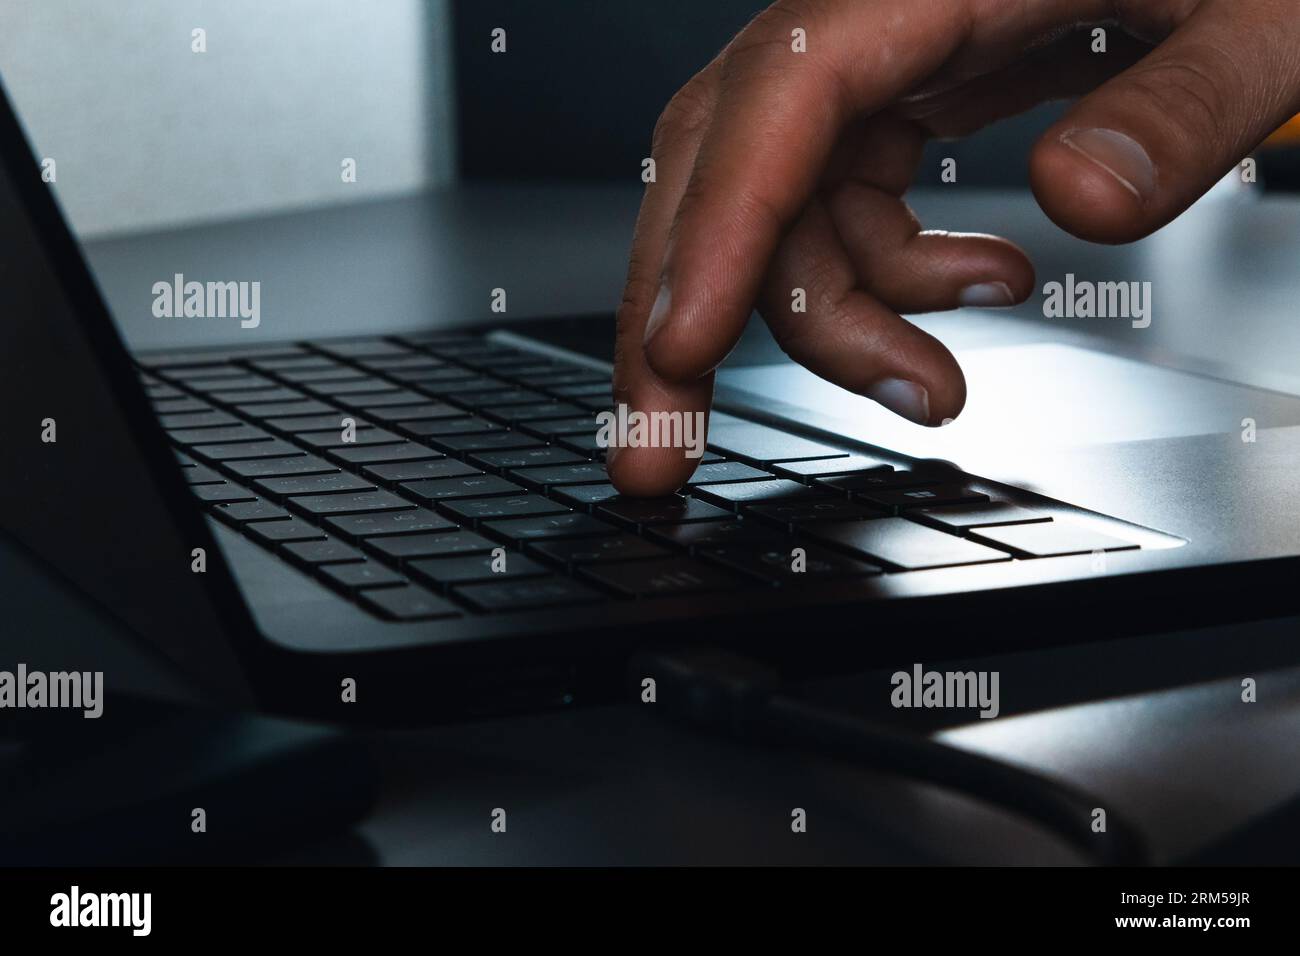 Hands touching the keyboard Stock Photo